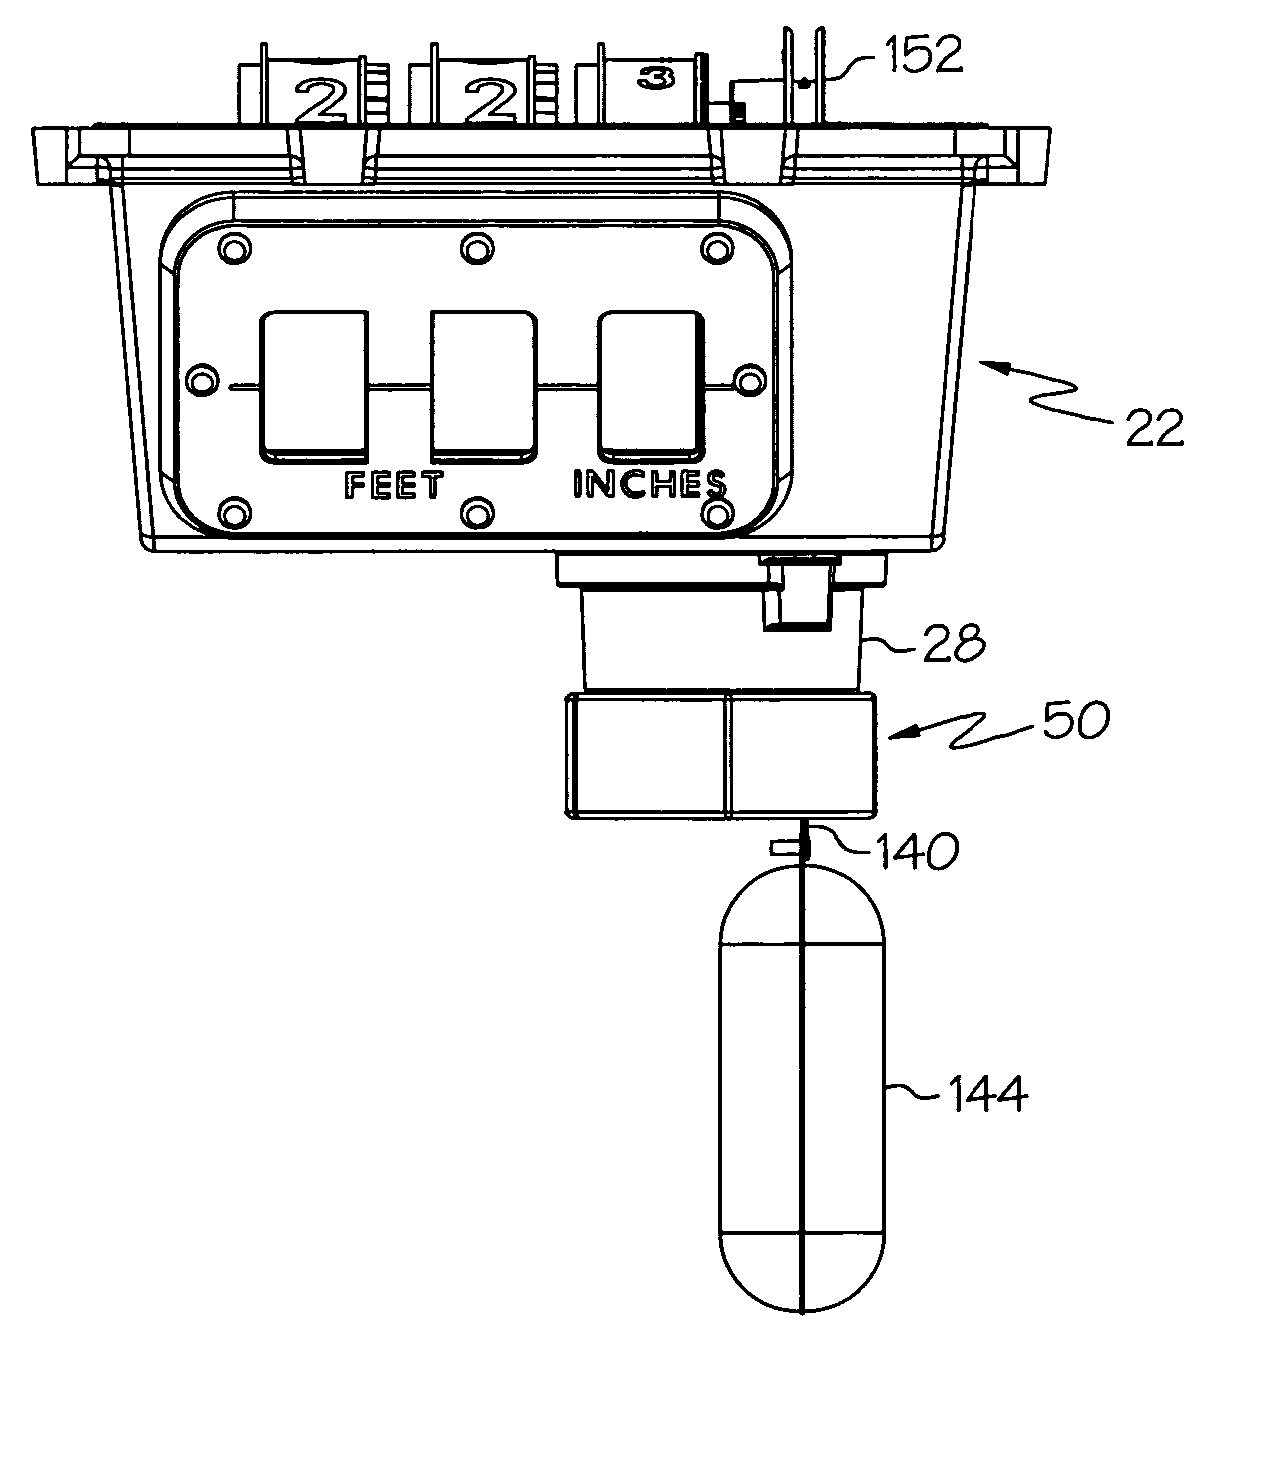 Apparatus for measuring a fluid level and methods